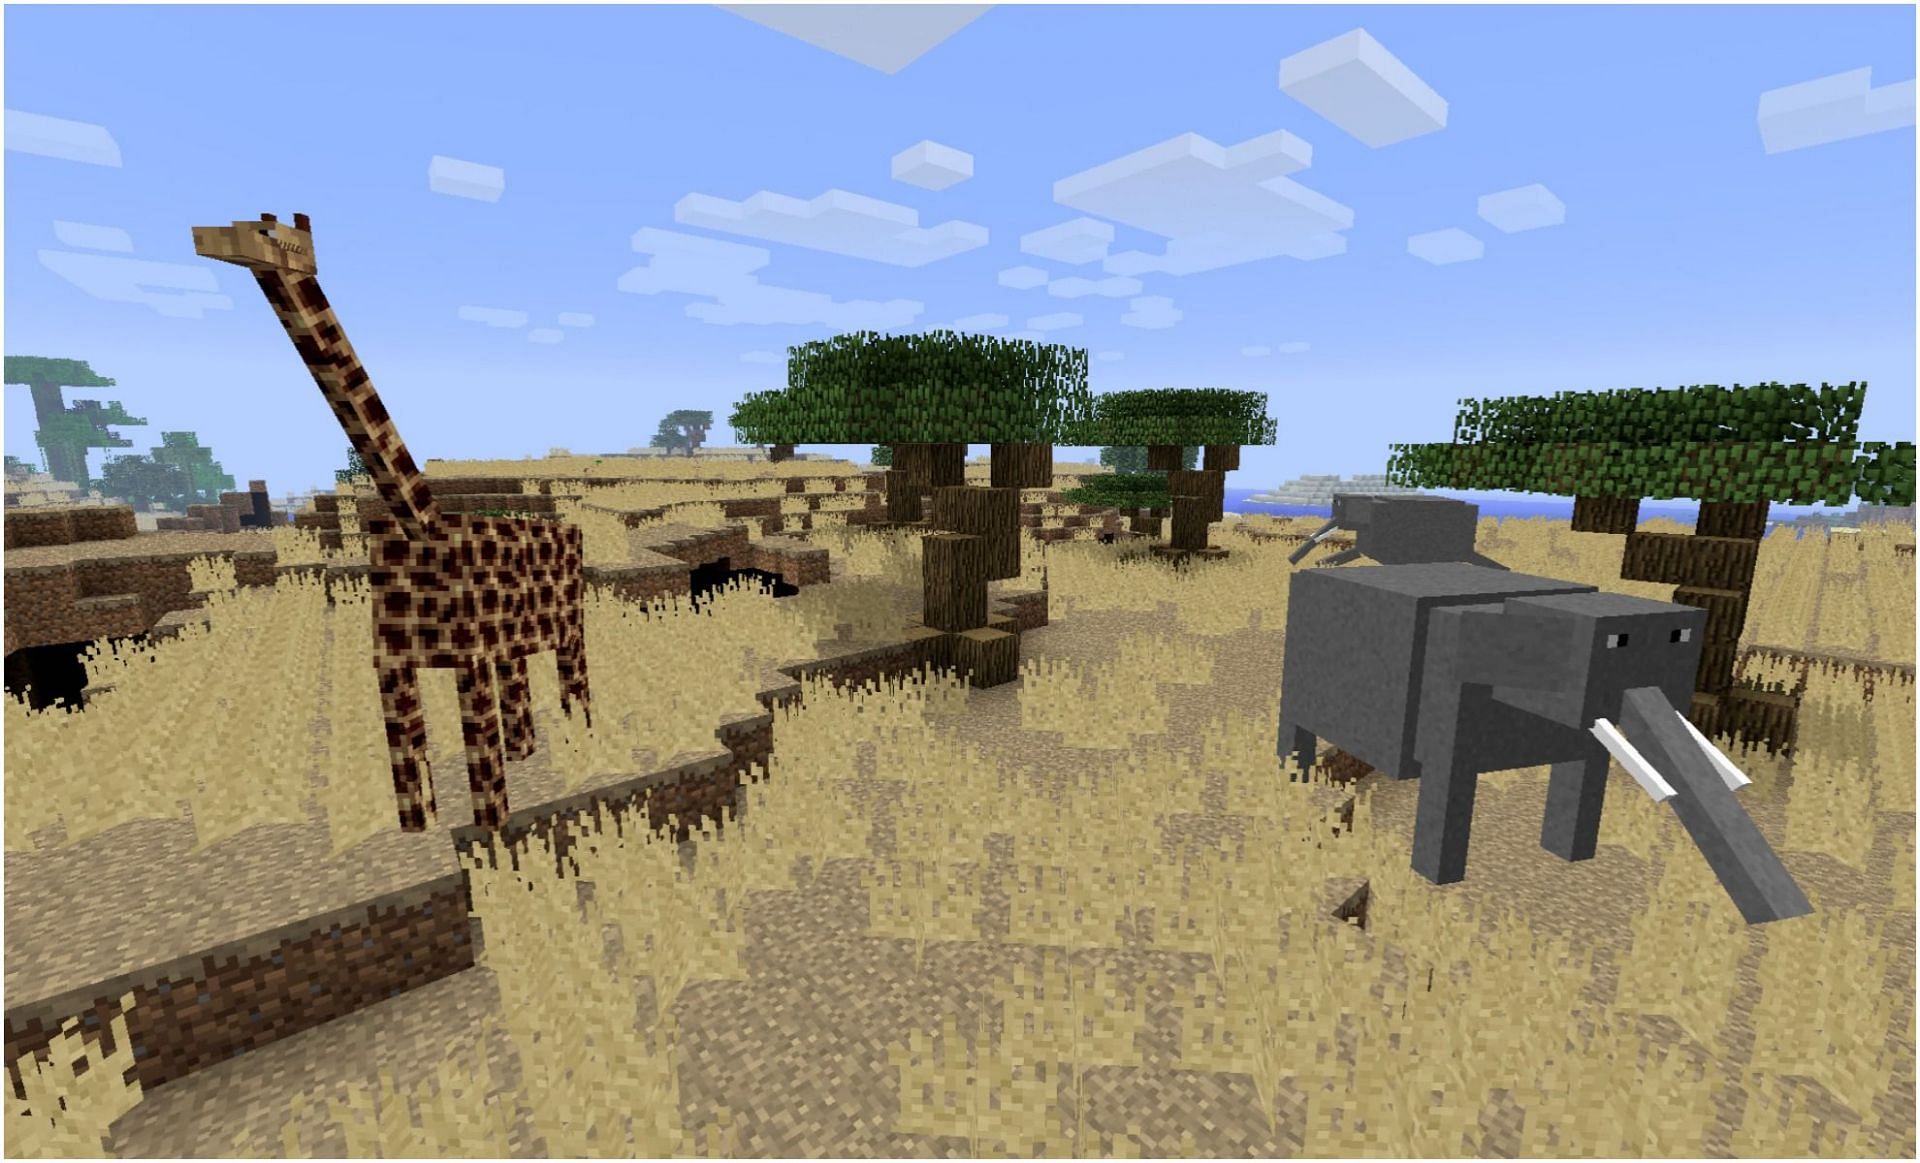 Add-ons make a big difference to the overall Minecraft experience (Image via Minecraft)